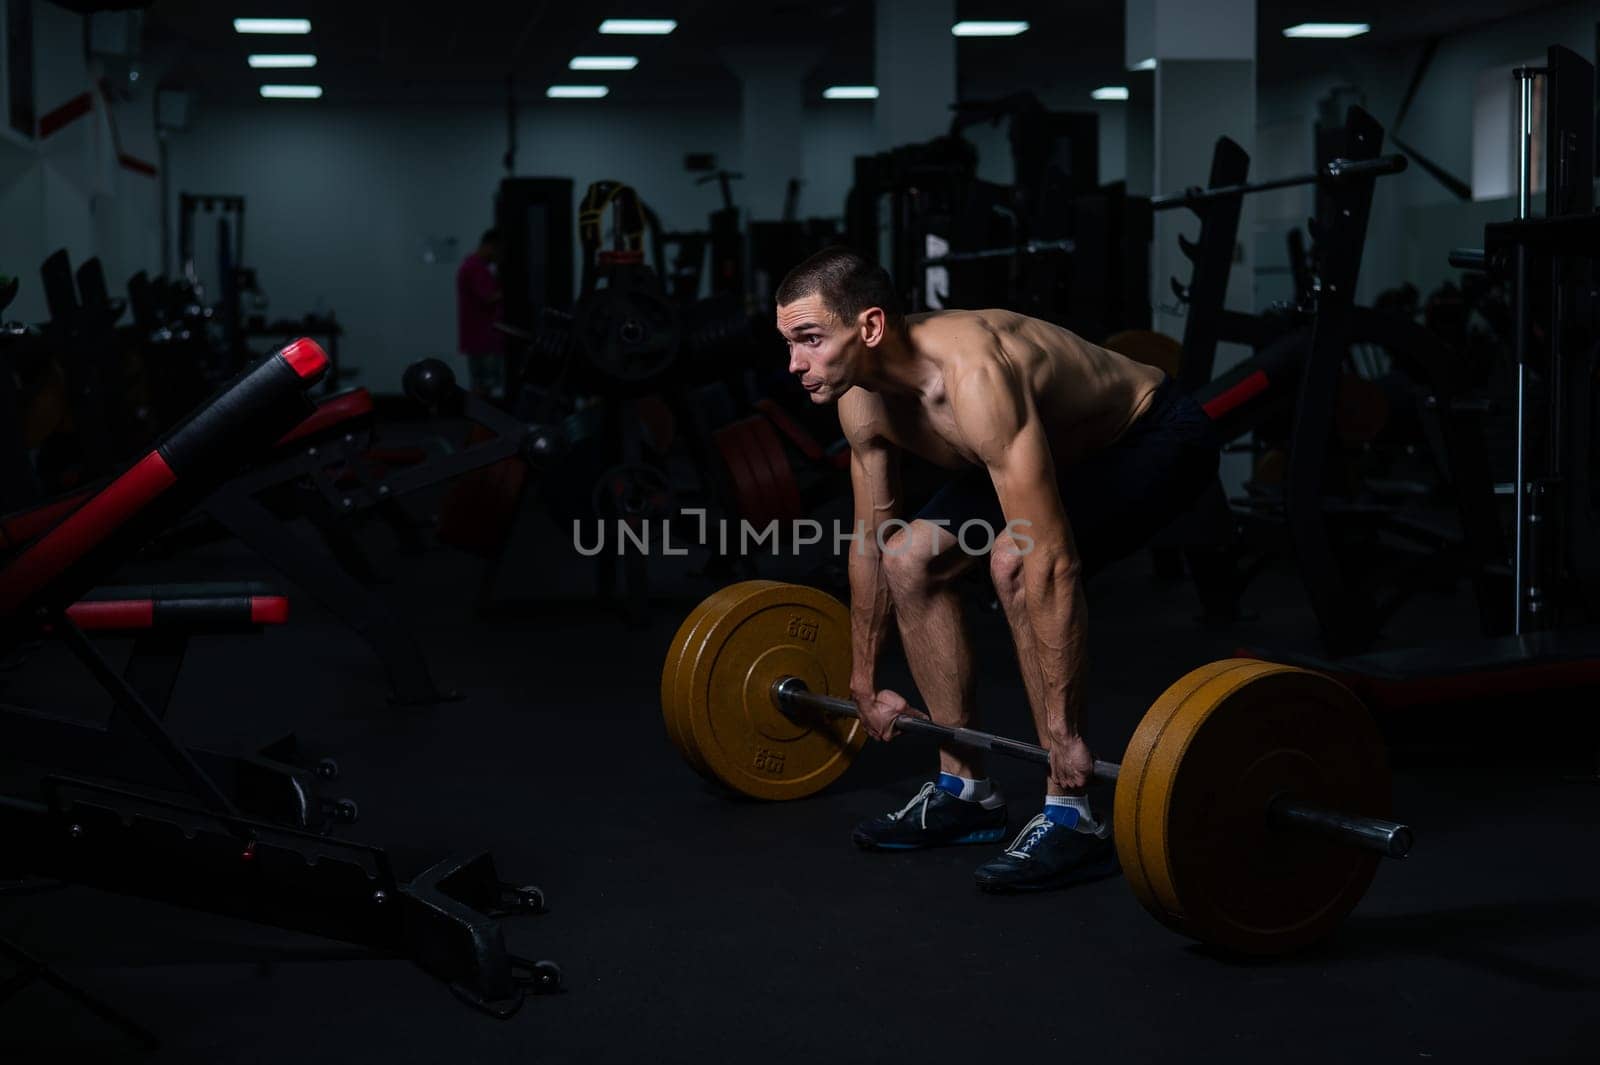 Shirtless man doing bicep exercises with dumbbells in the gym